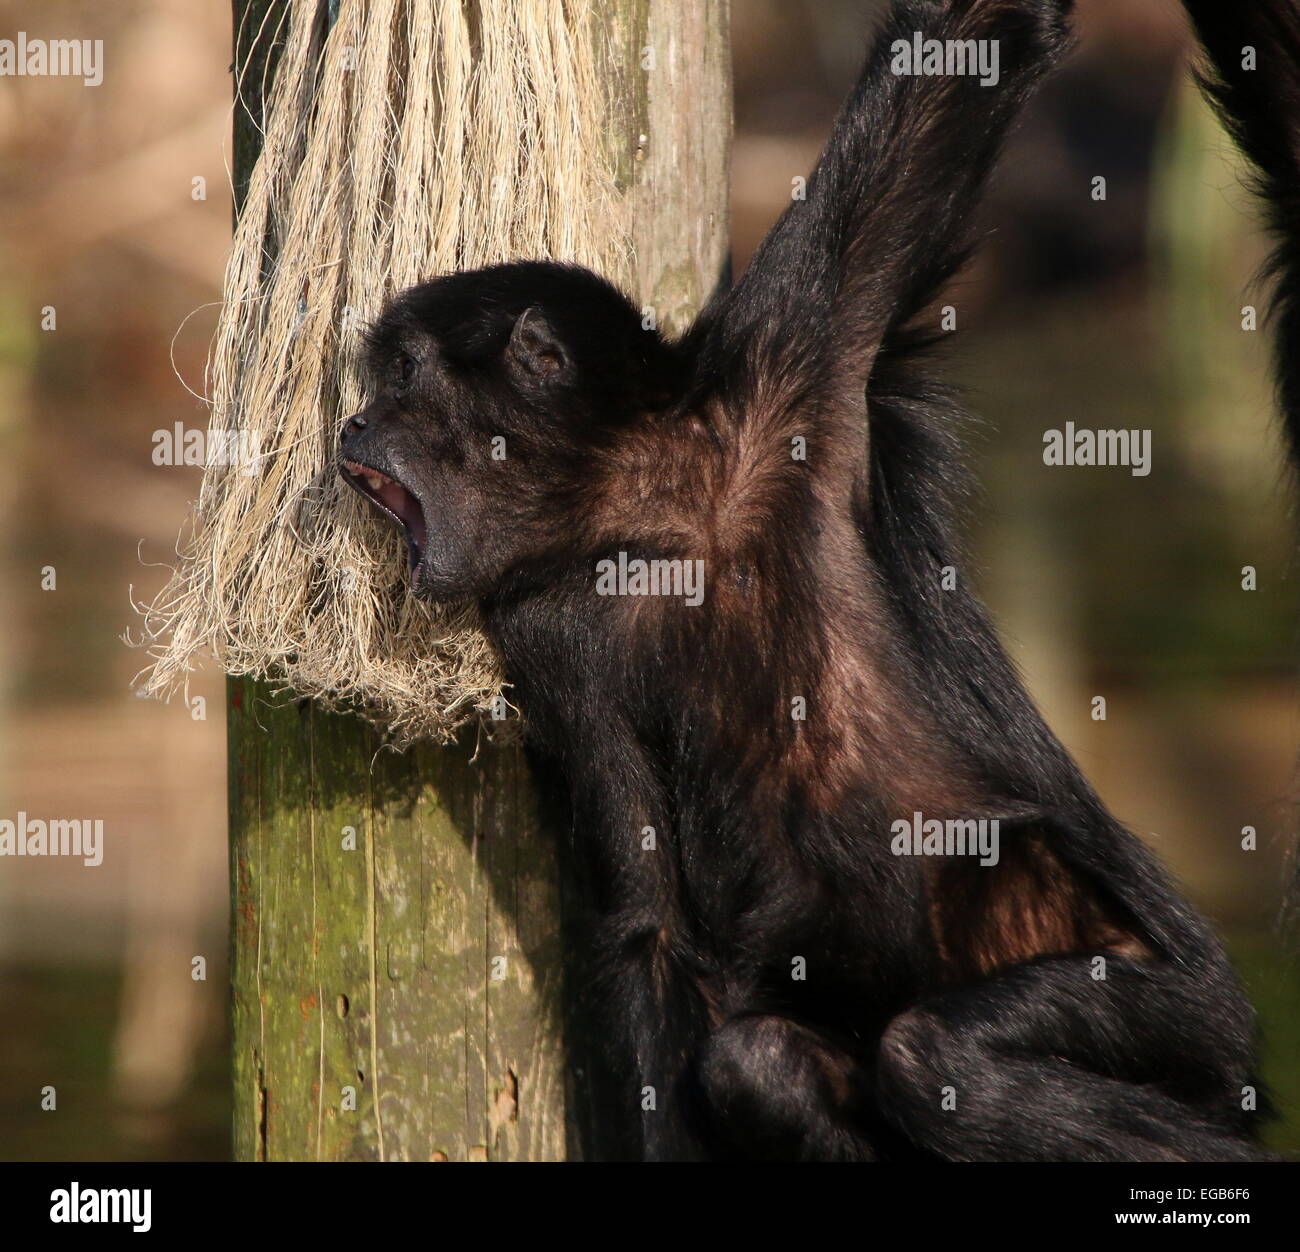 Howling Colombian Black-headed spider monkey (Ateles fusciceps Robustus) at Emmen Zoo, The Netherlands Stock Photo